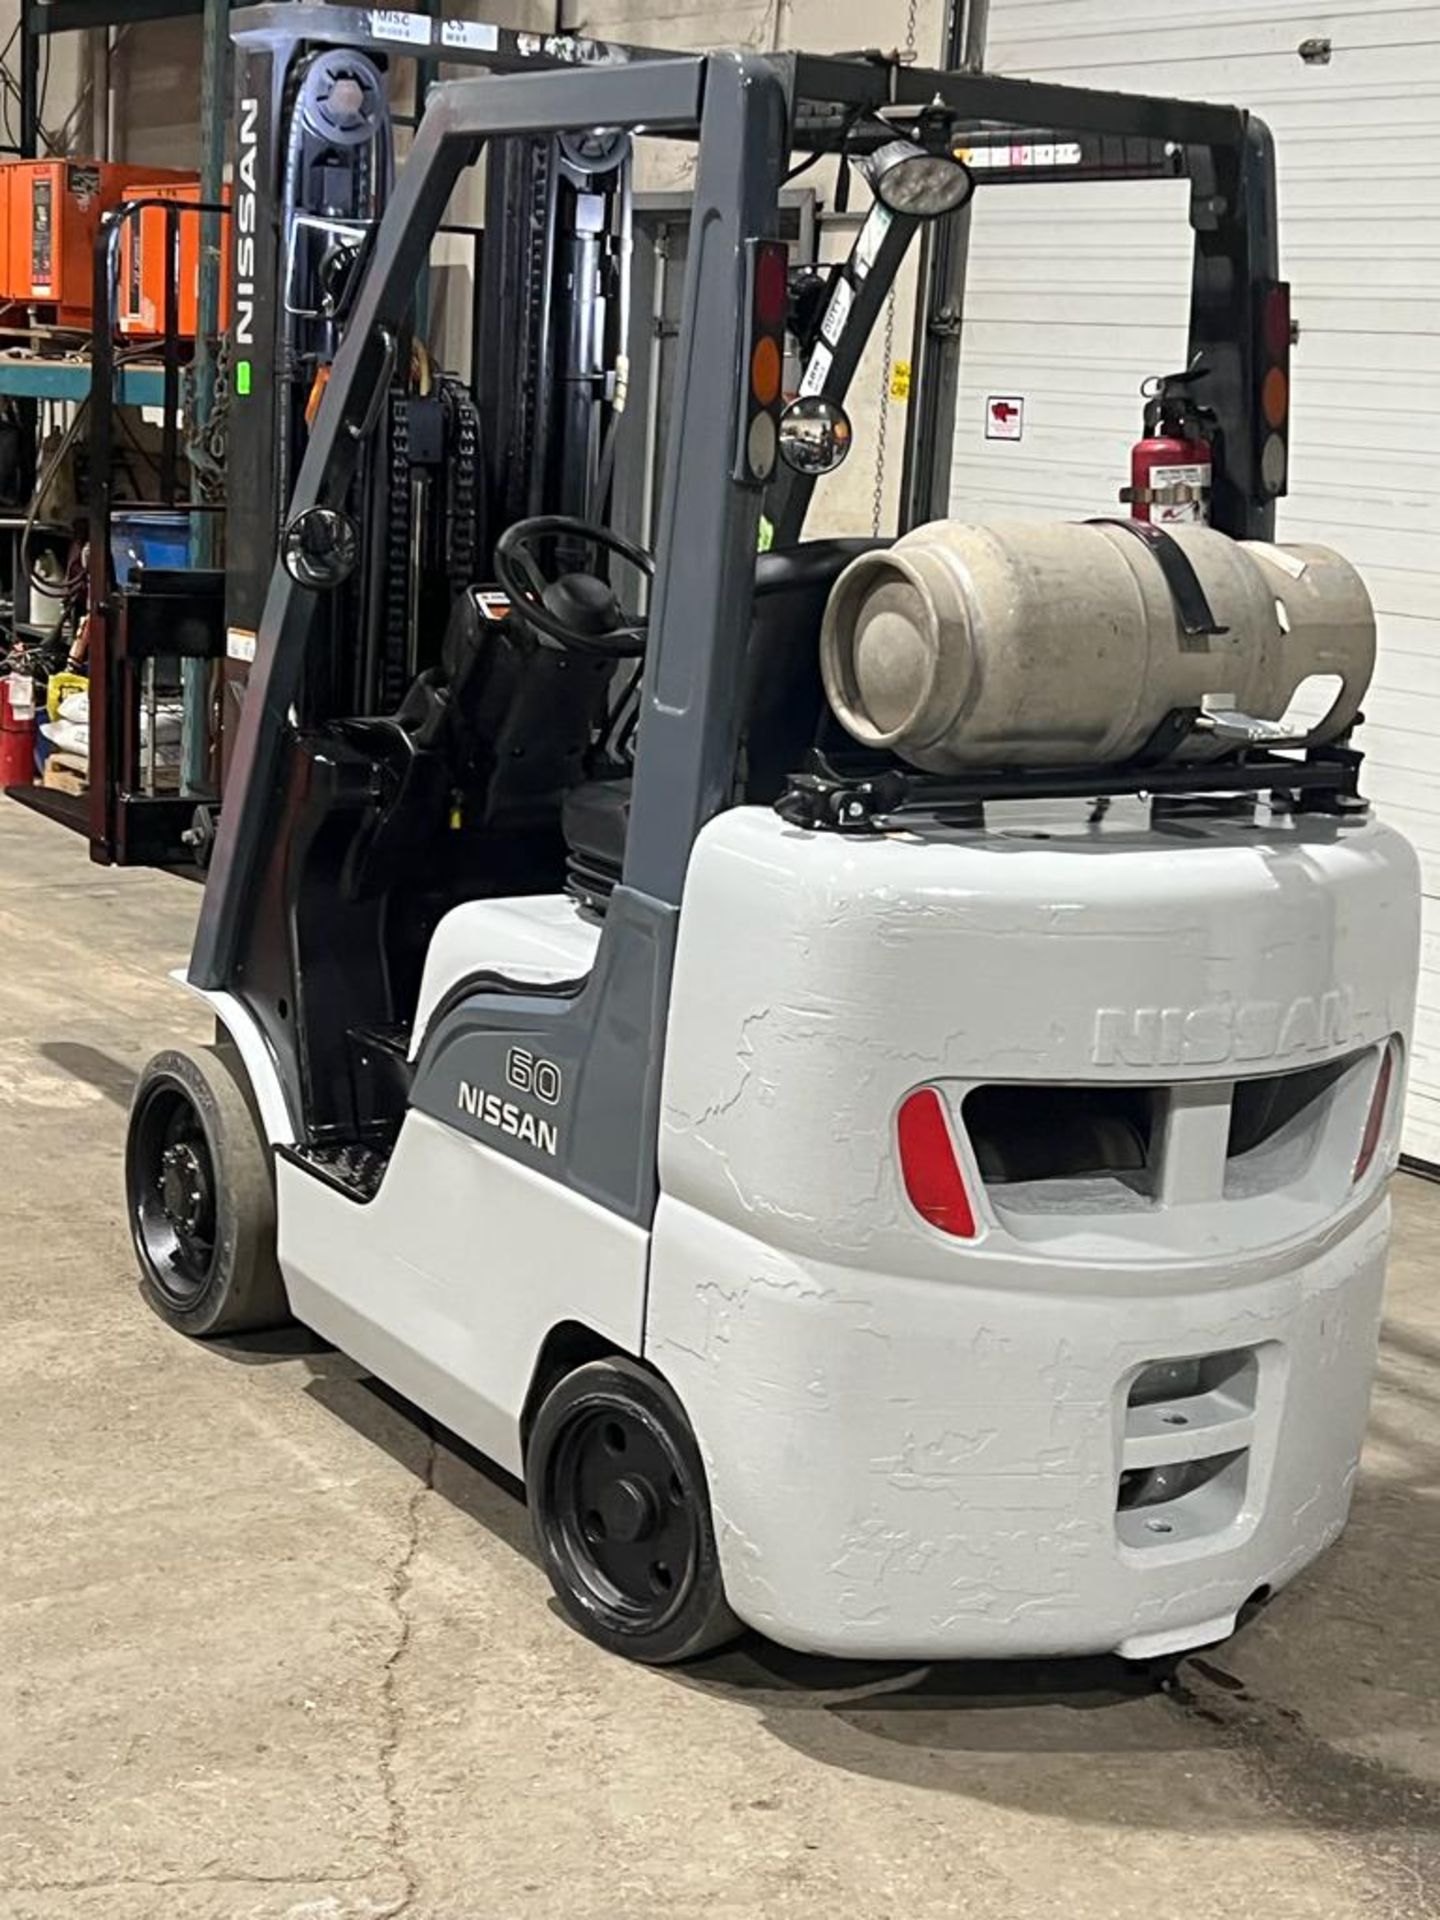 2013 Nissan 60 - 6,000lbs Capacity Forklift LPG (propane) with Sideshift & 3 stage mast with LOW - Image 2 of 3